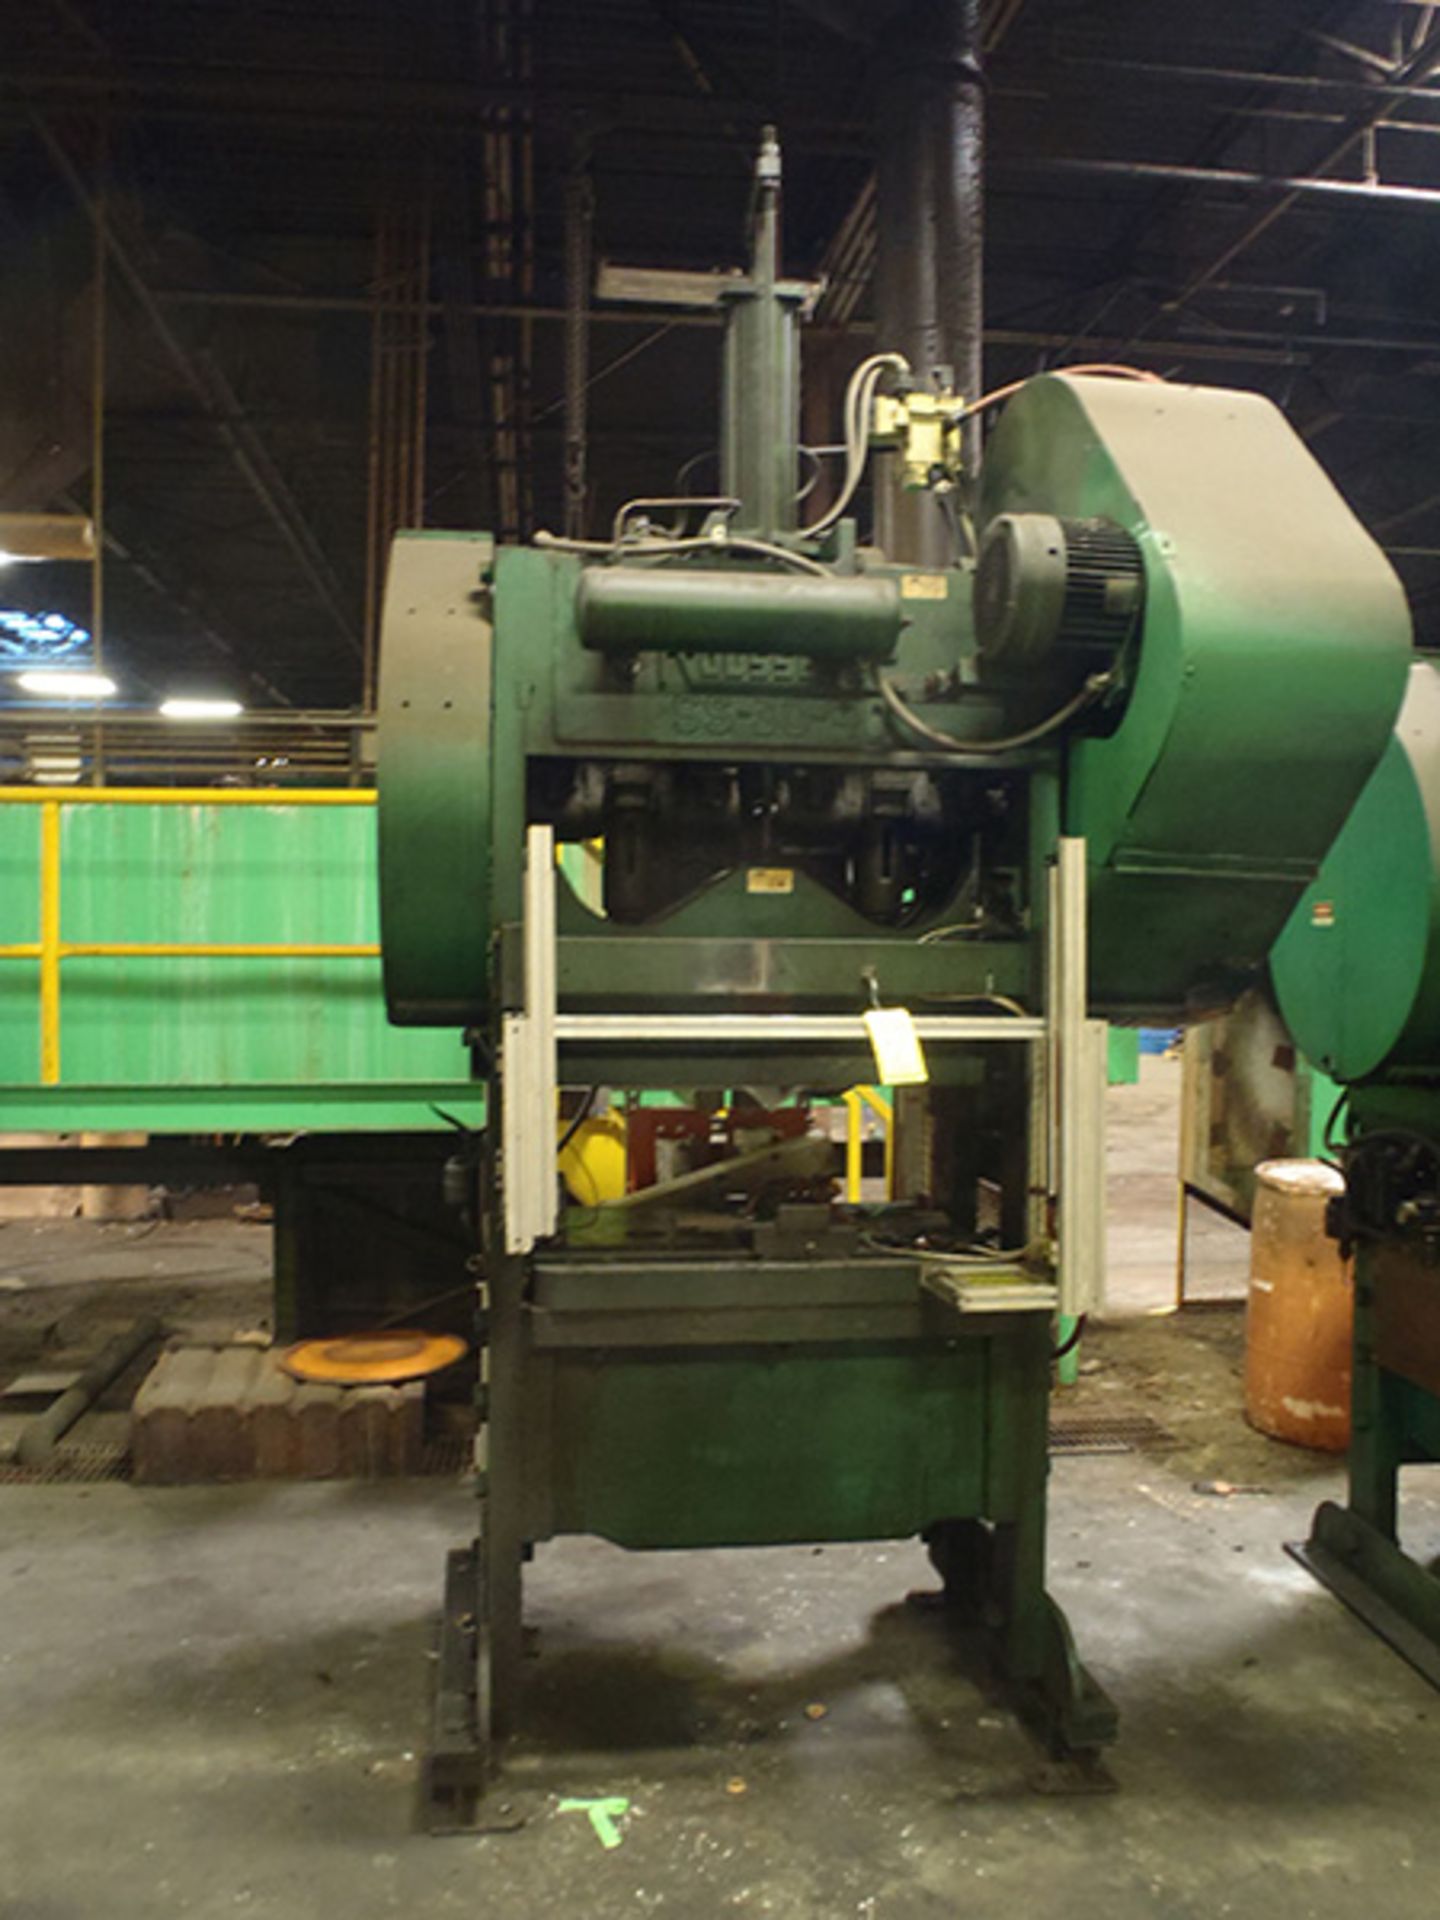 ROUSSELLE 100-TON PUNCH PRESS, MODEL 10S40 (RIGGING FEE $700.)